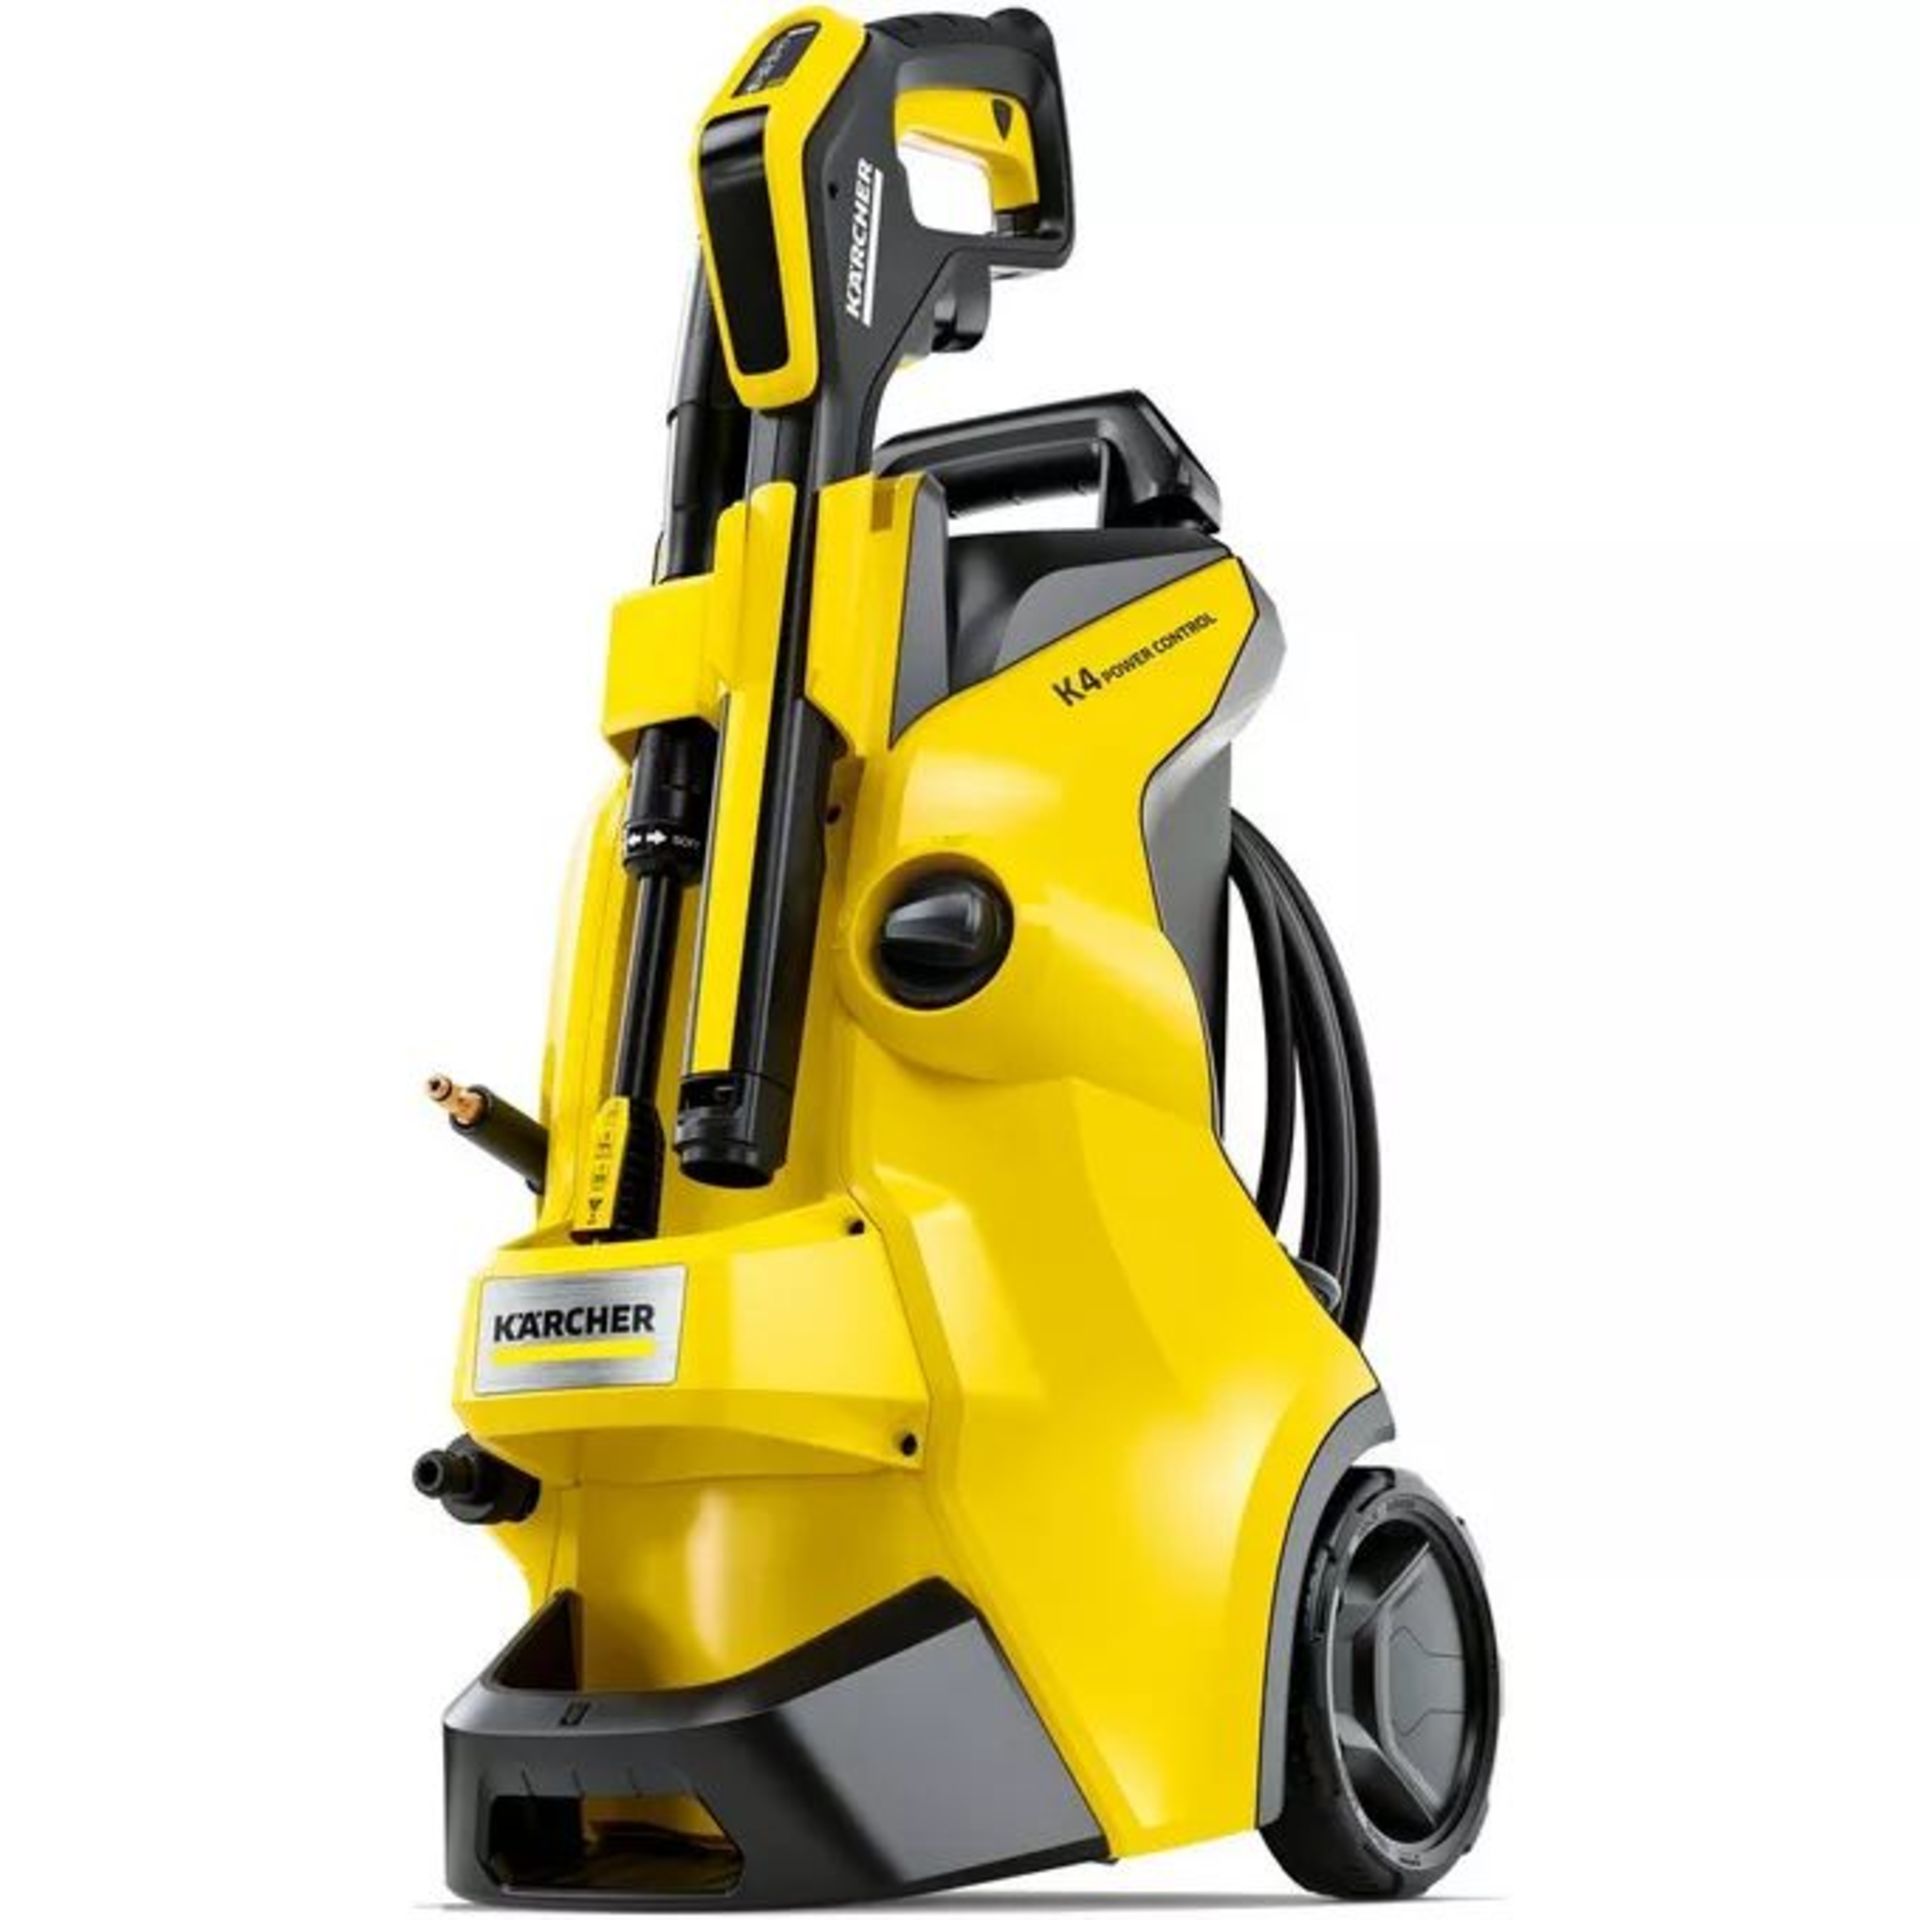 KARCHER K4 POWER CONTROL CORDED PRESSURE WASHER 1.8KW RRP £249 R16-8